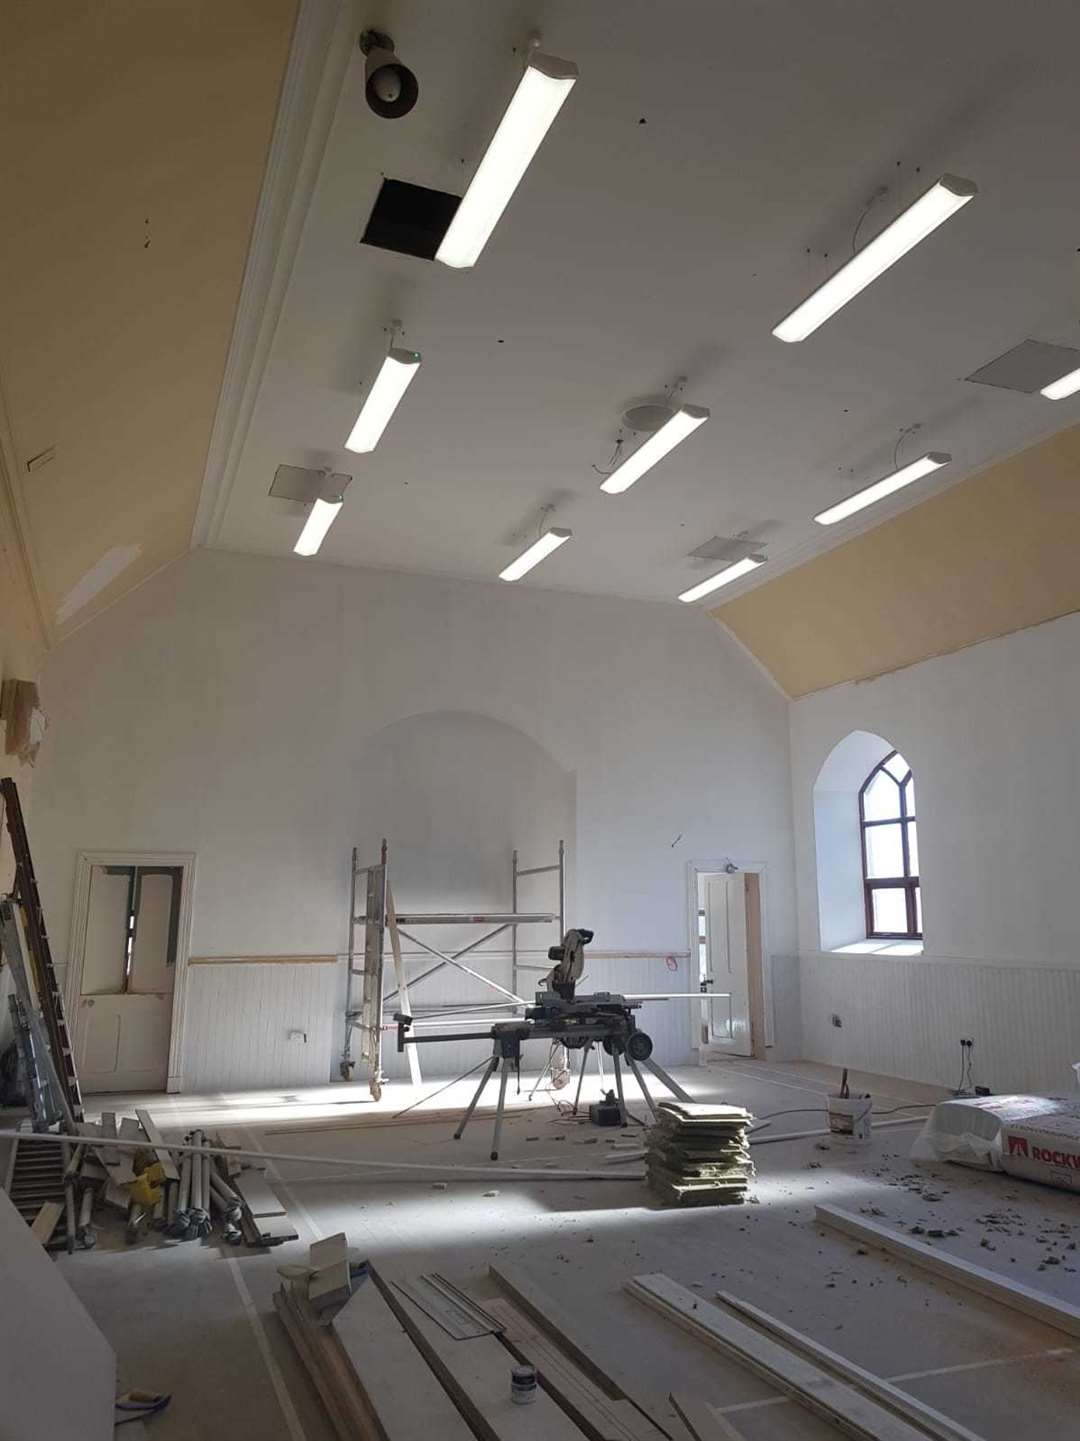 LED lighting has been fitted in the community space.